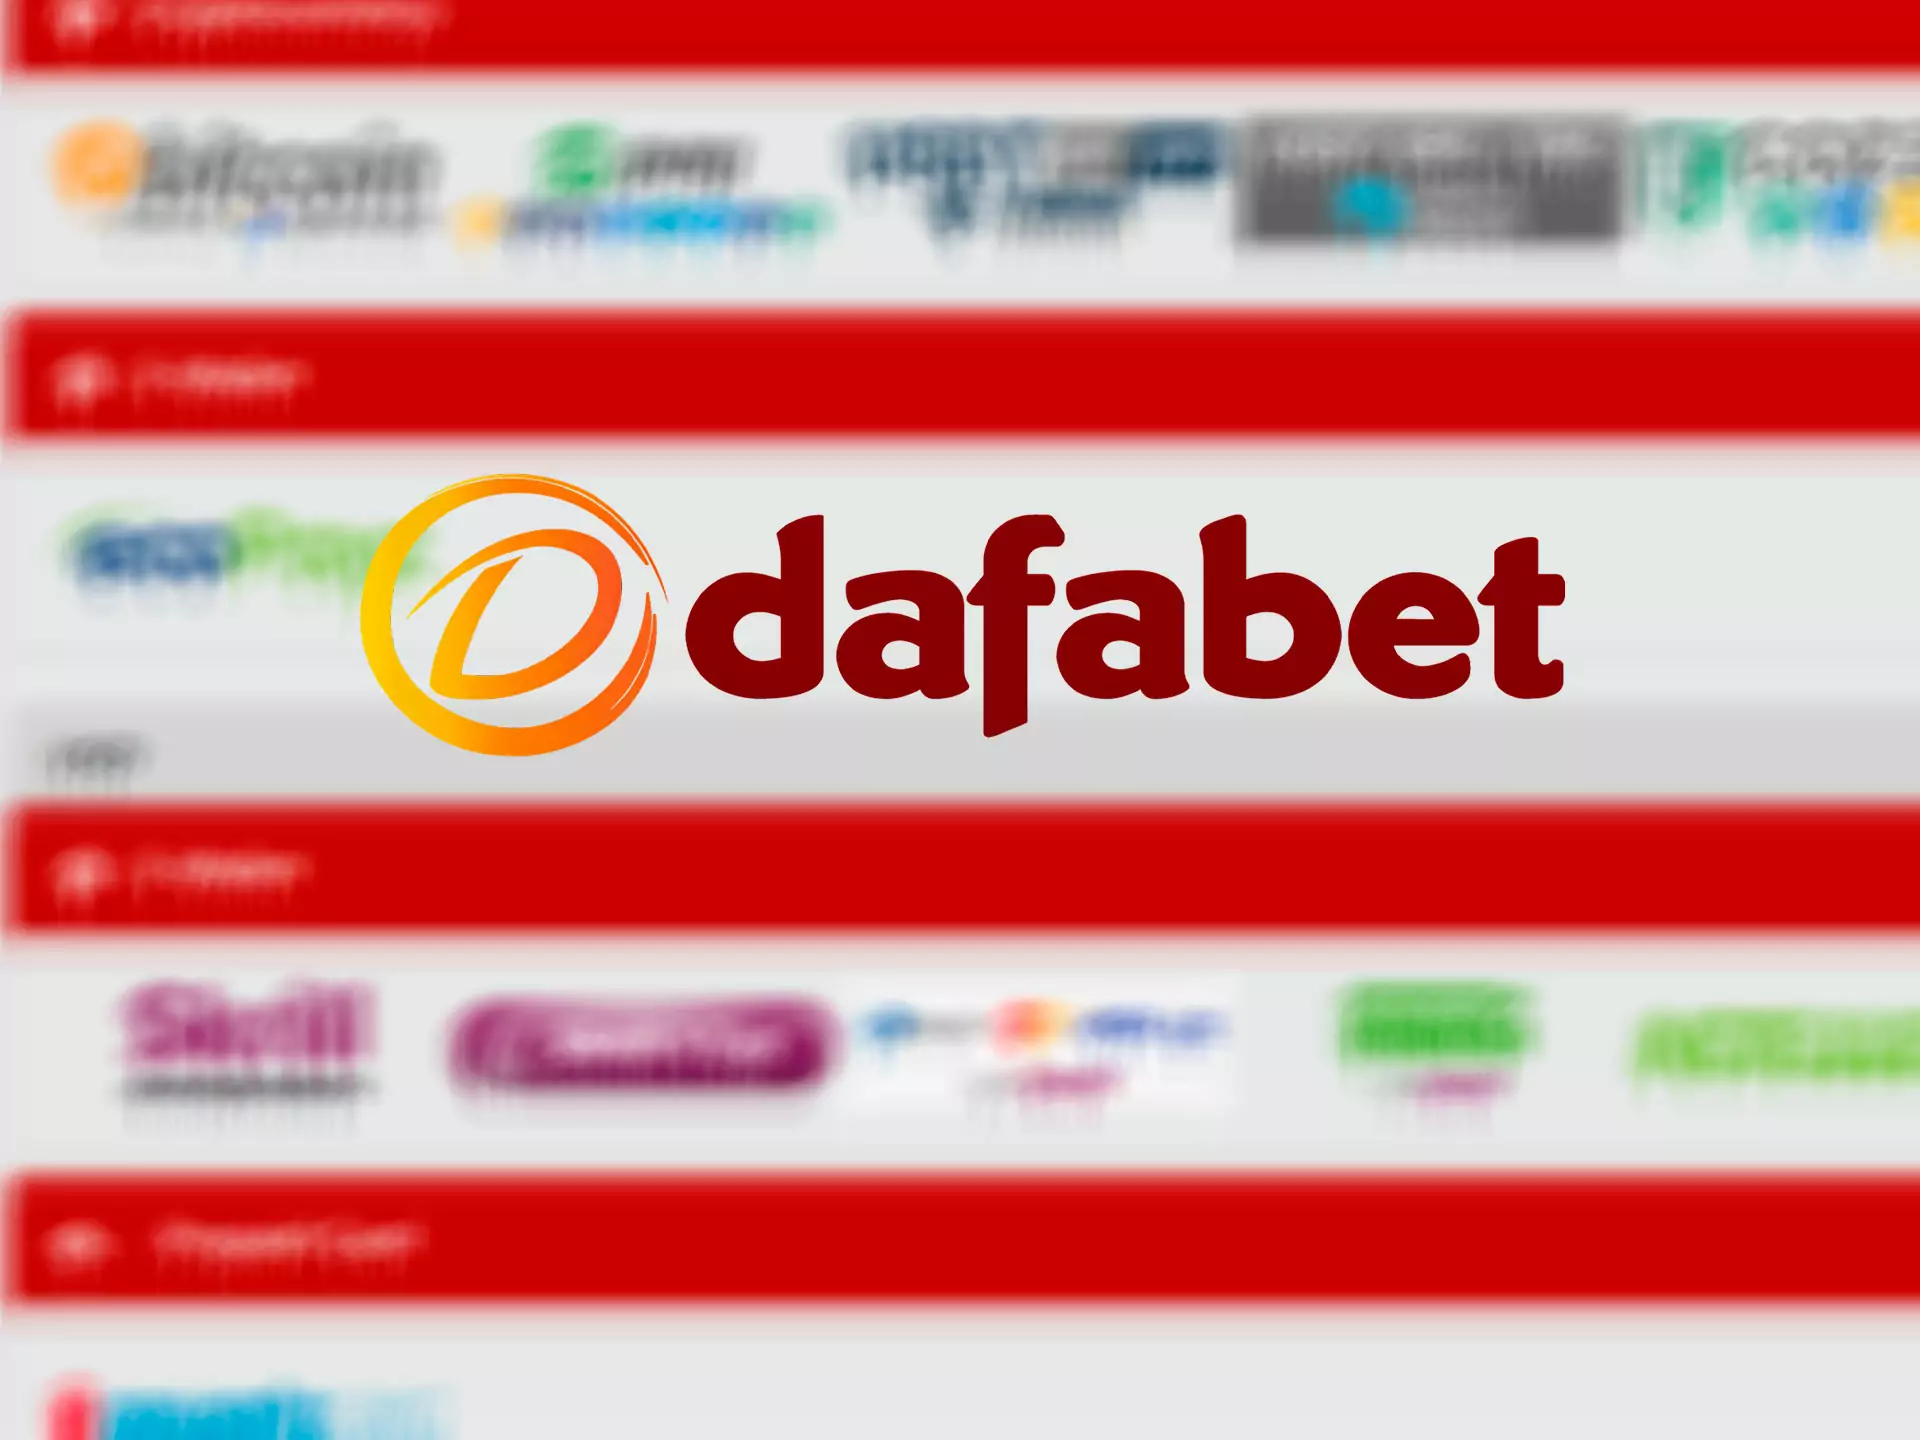 Indian players can find a lot of payment methods for depositing and withdrawing at Dafabet.